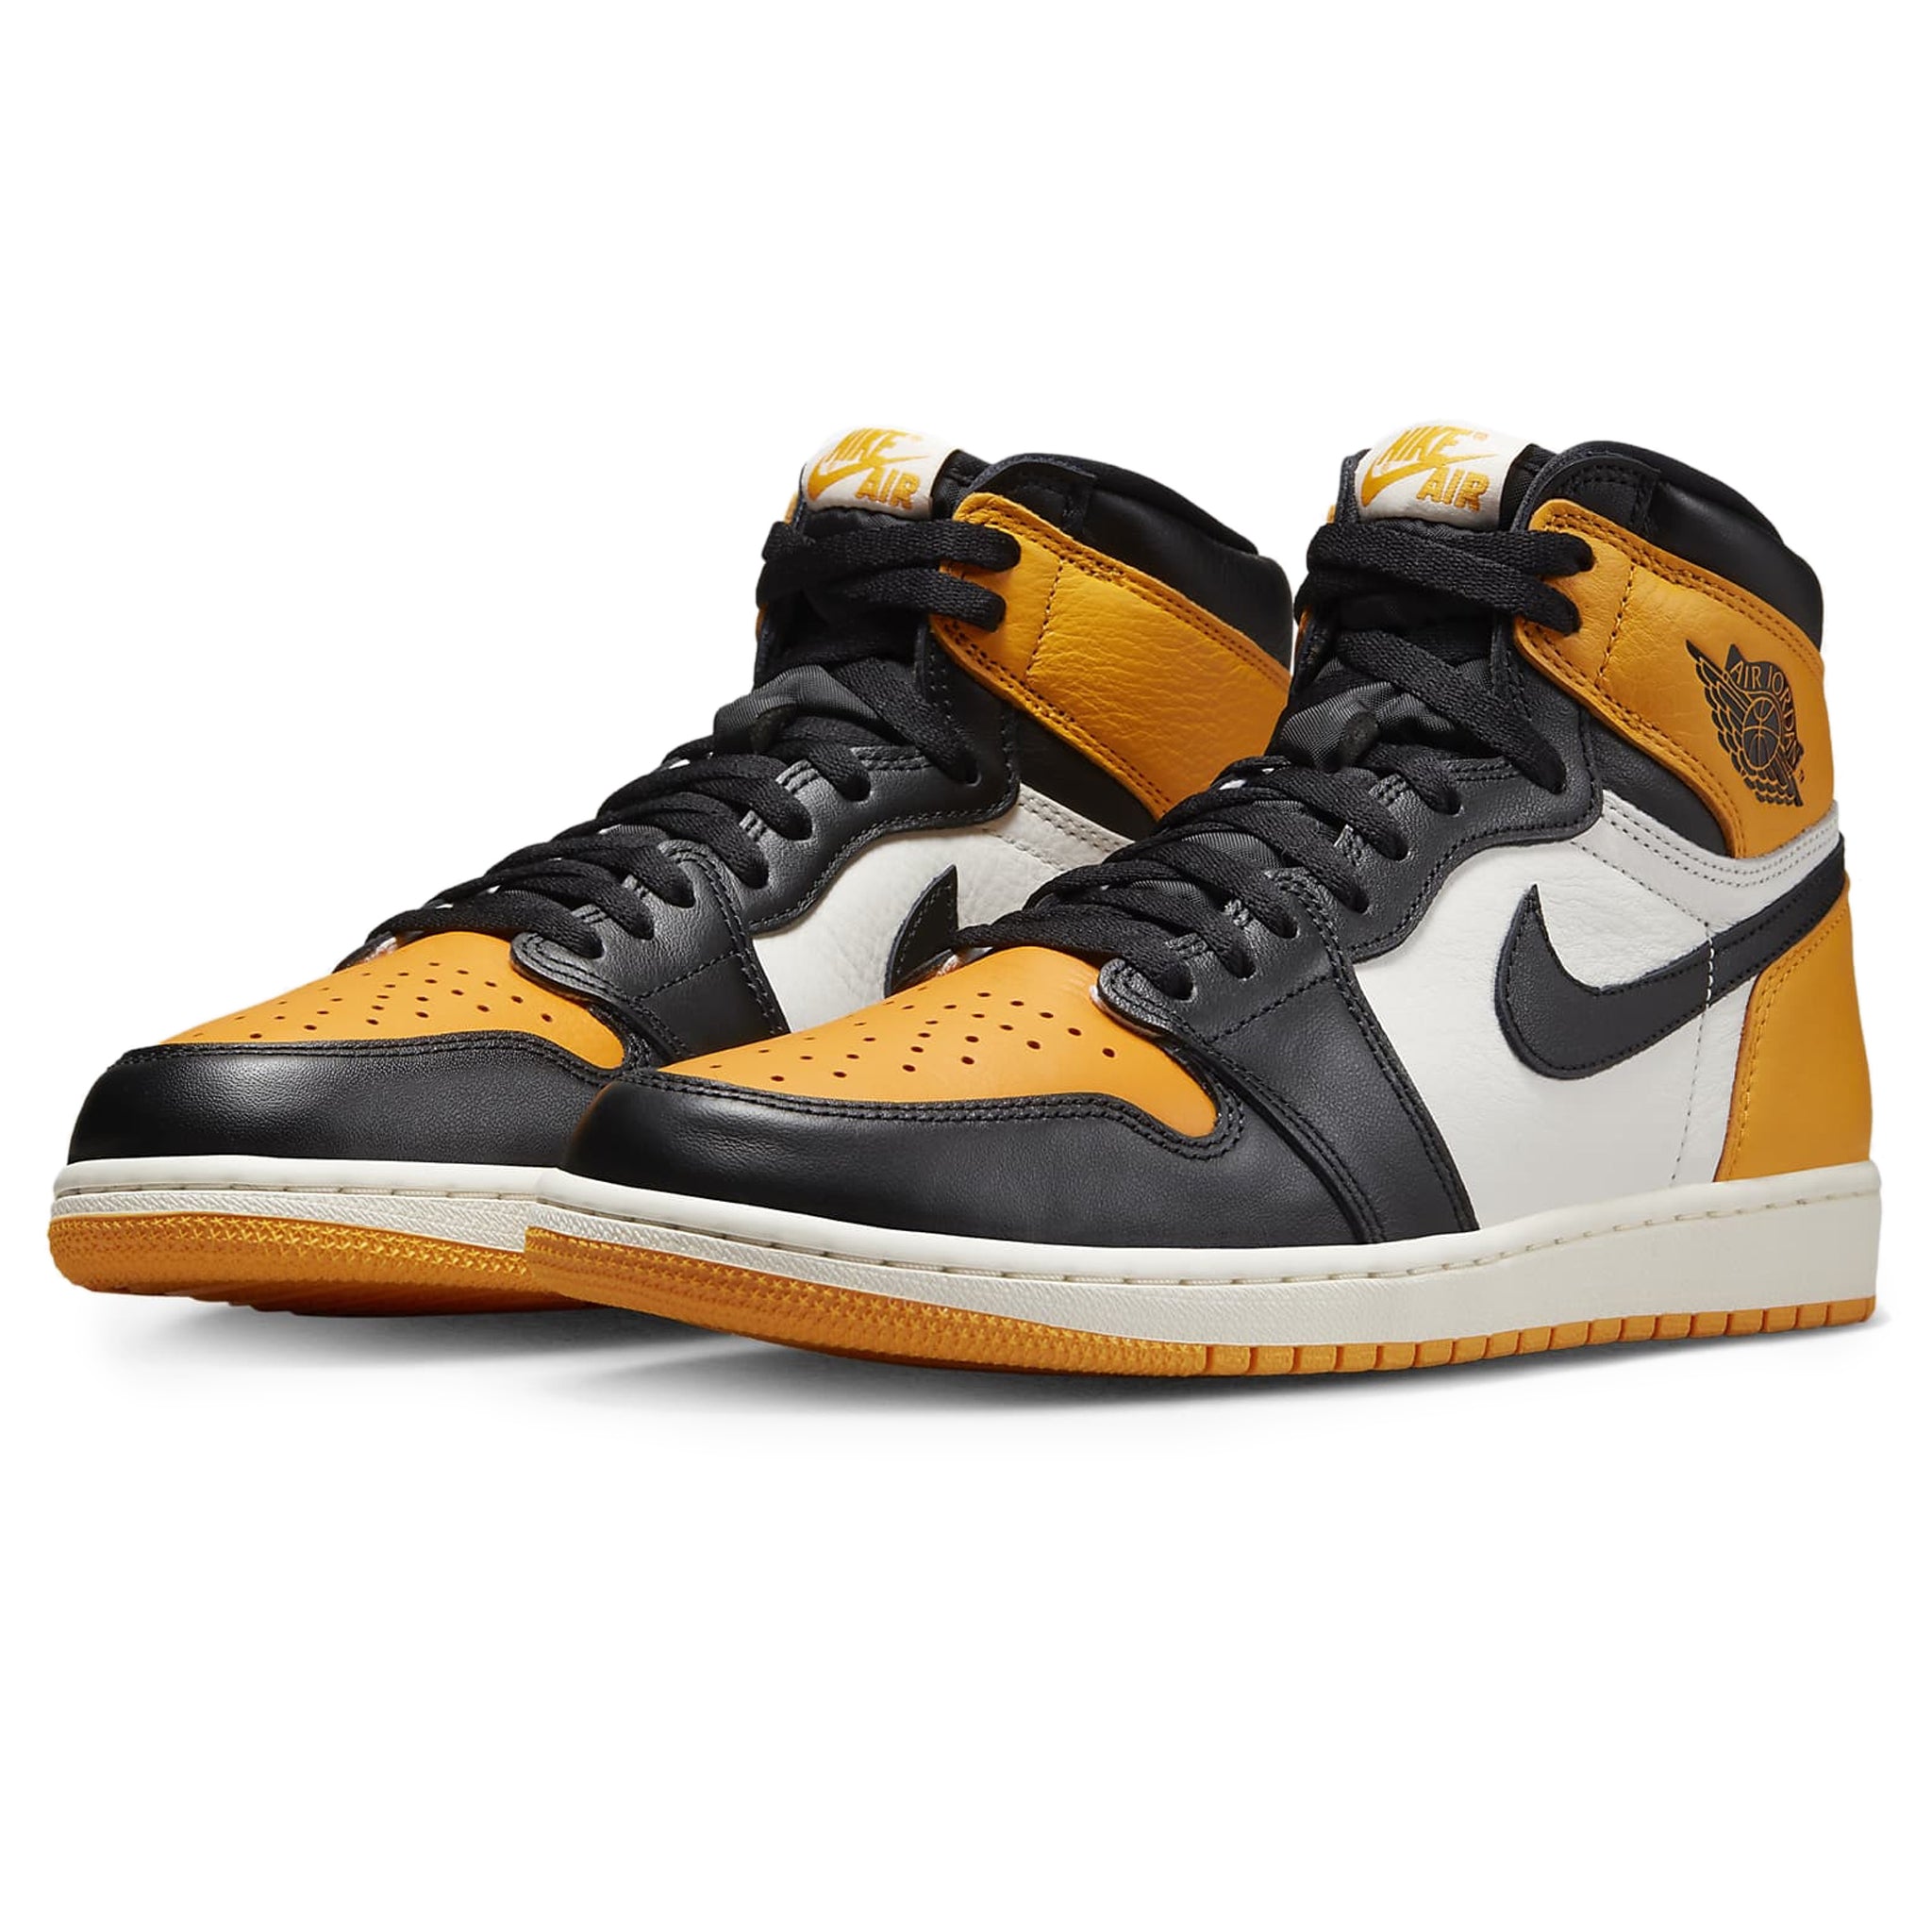 Front side view of Air Jordan 1 Retro High OG Yellow Toe Taxi 555088-711